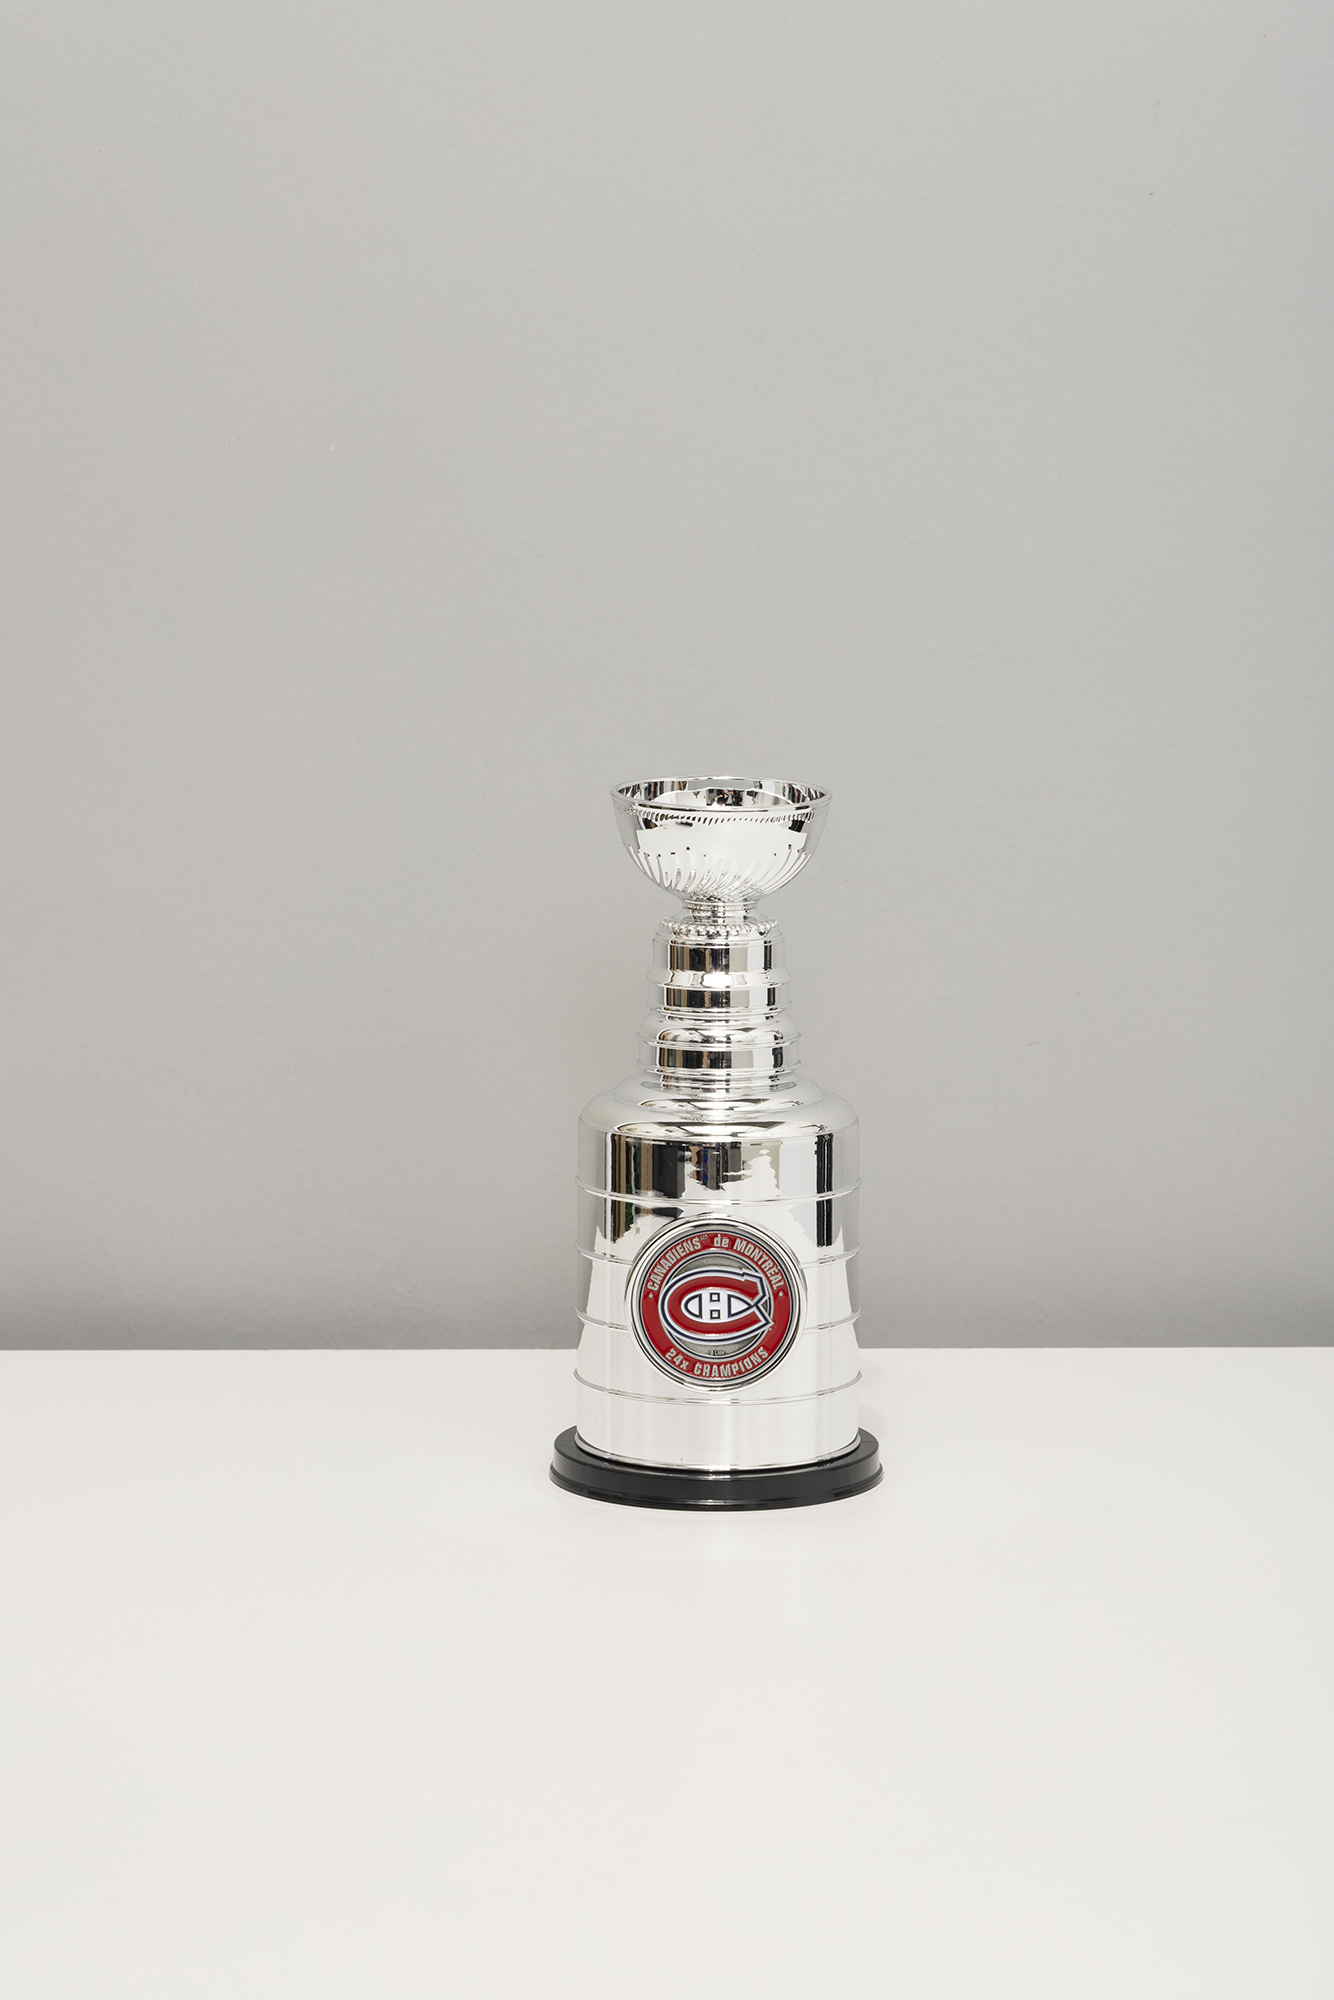 MOLSON CANADIAN REPLICA STANLEY CUP 1927 - 1934 Mini Trophy Quest For The  Cup 